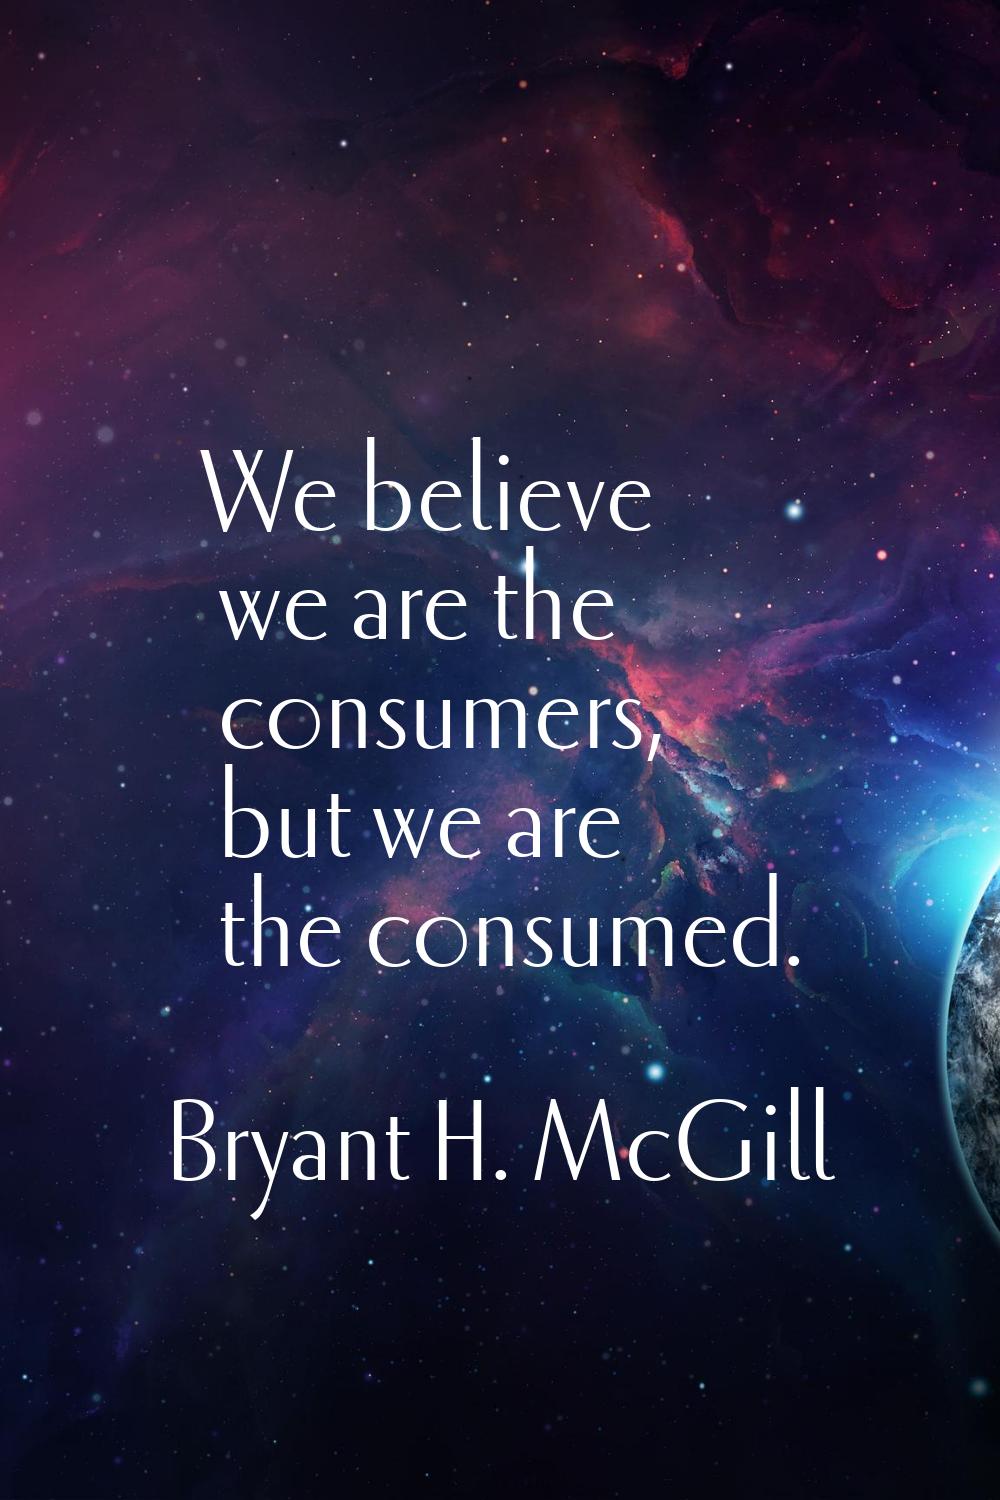 We believe we are the consumers, but we are the consumed.